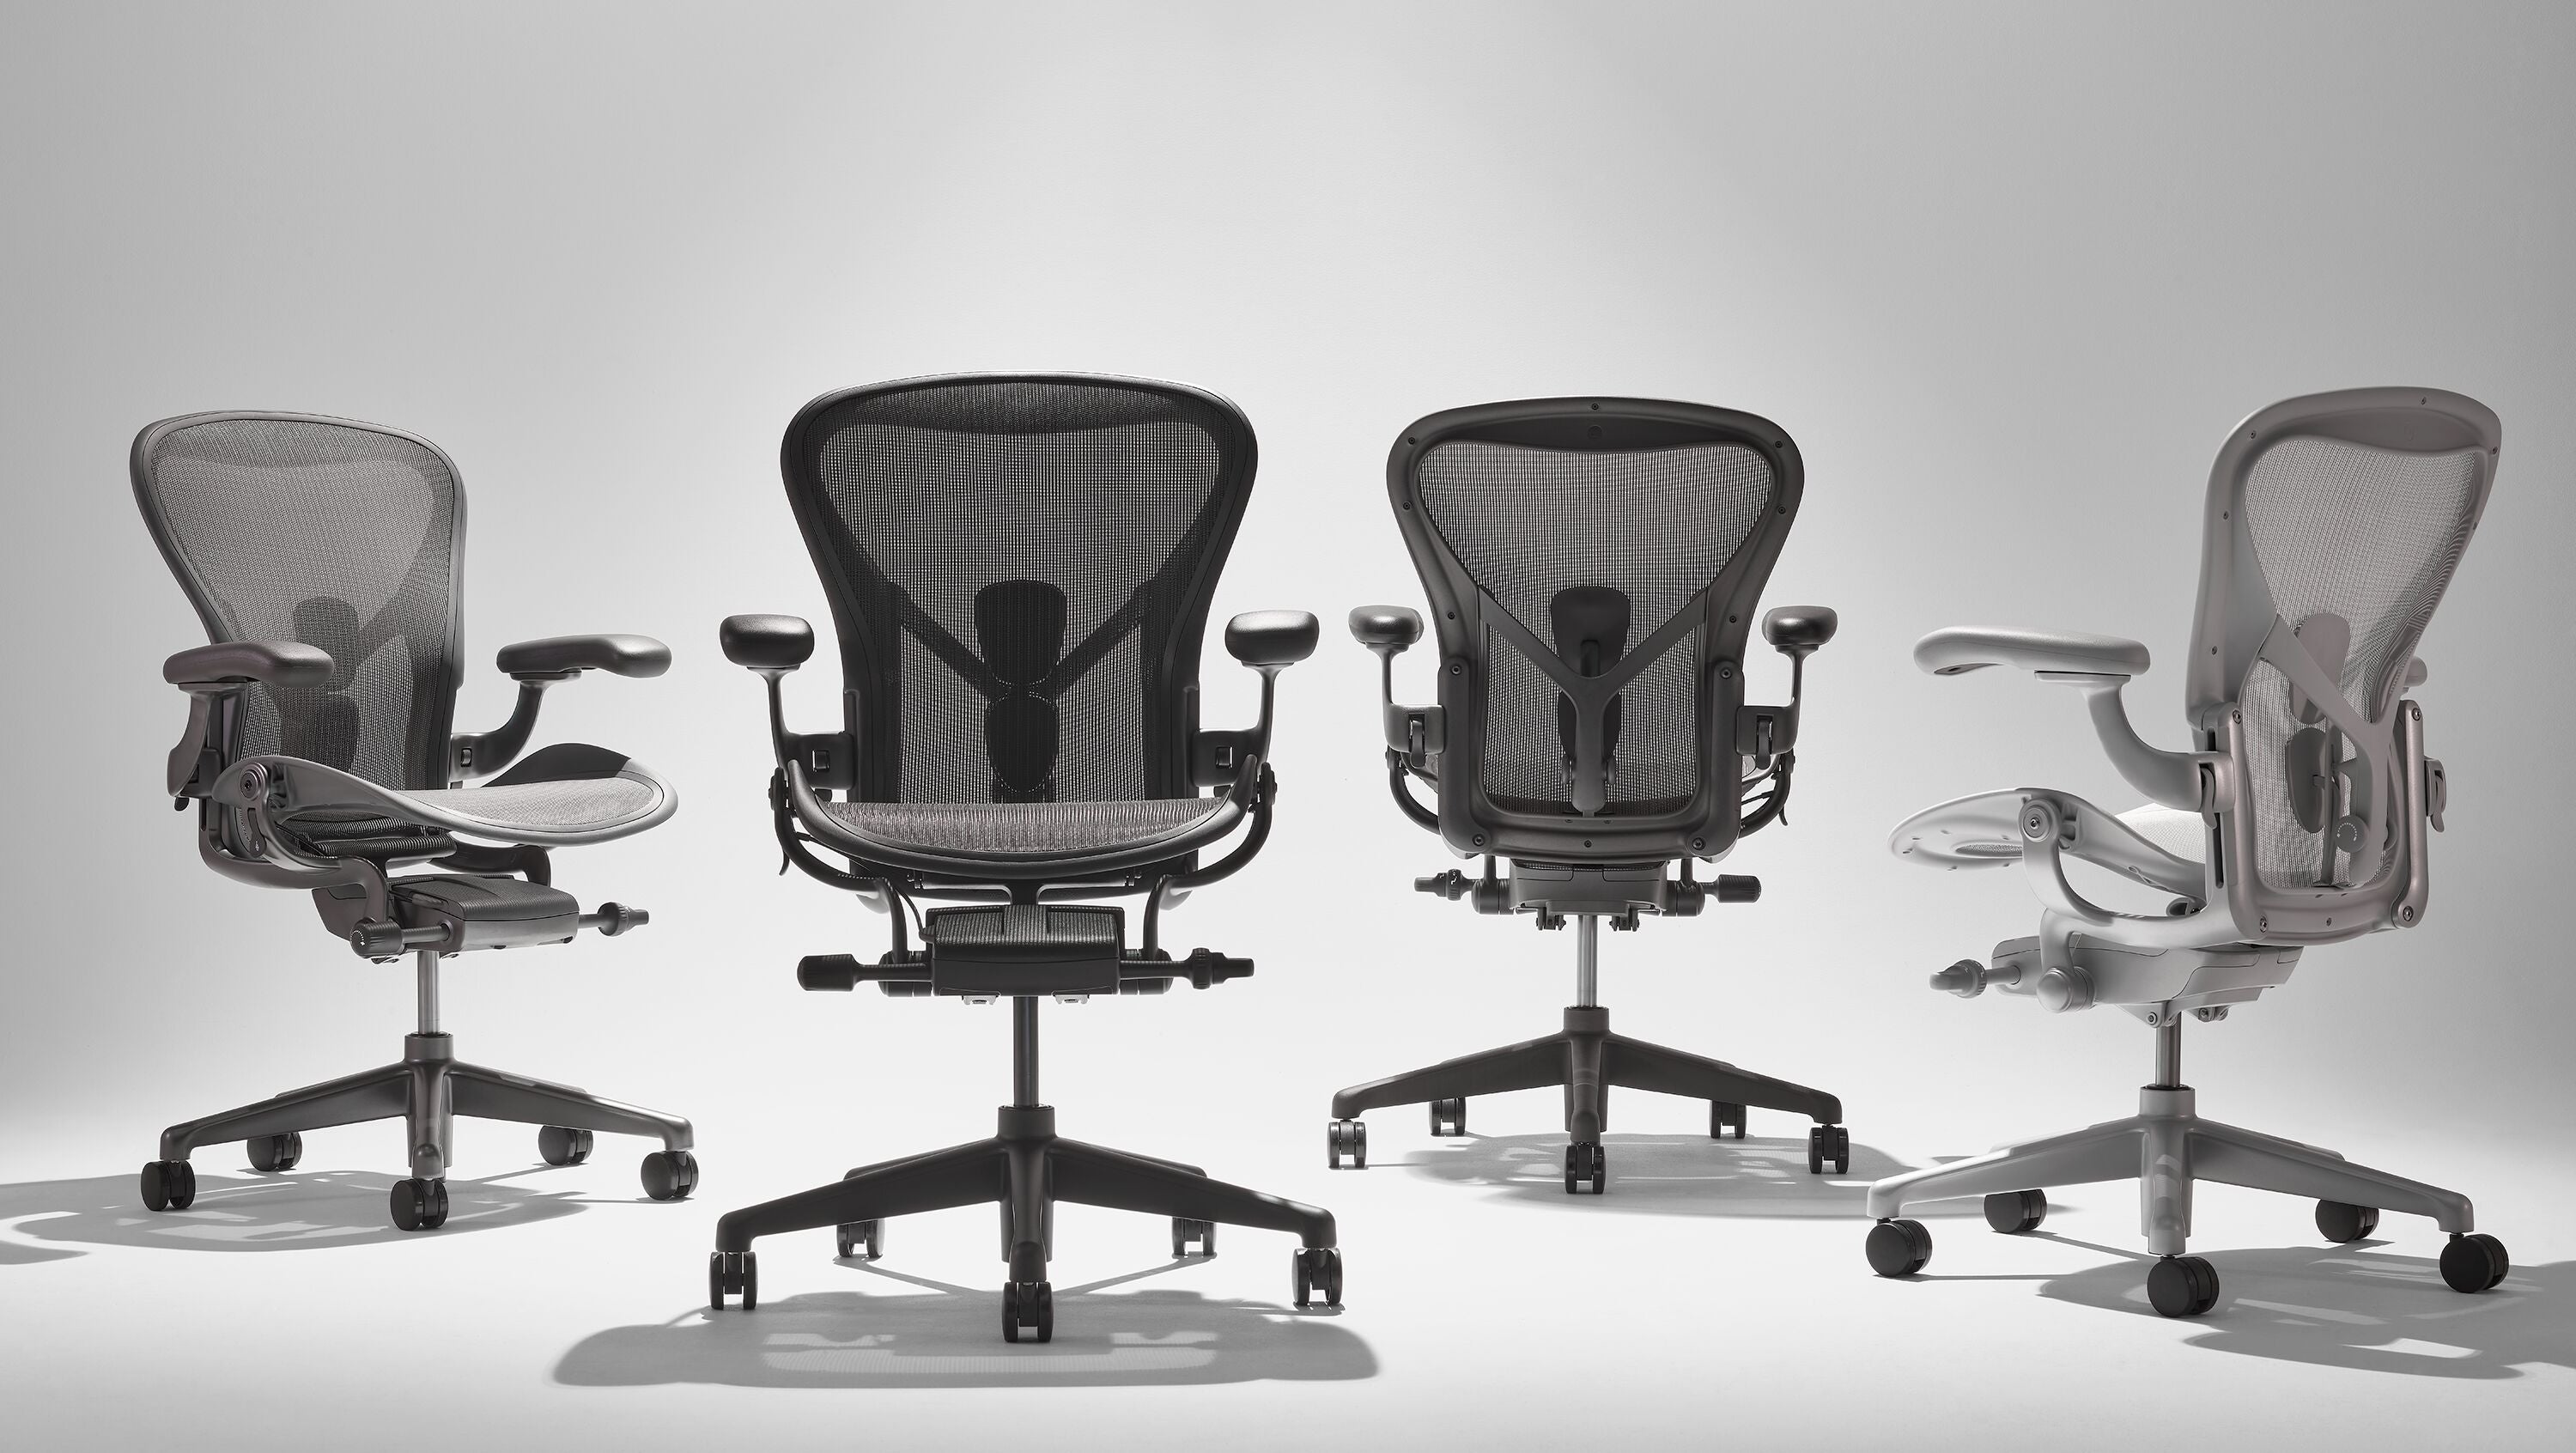 Why Choose A Herman Miller Chair